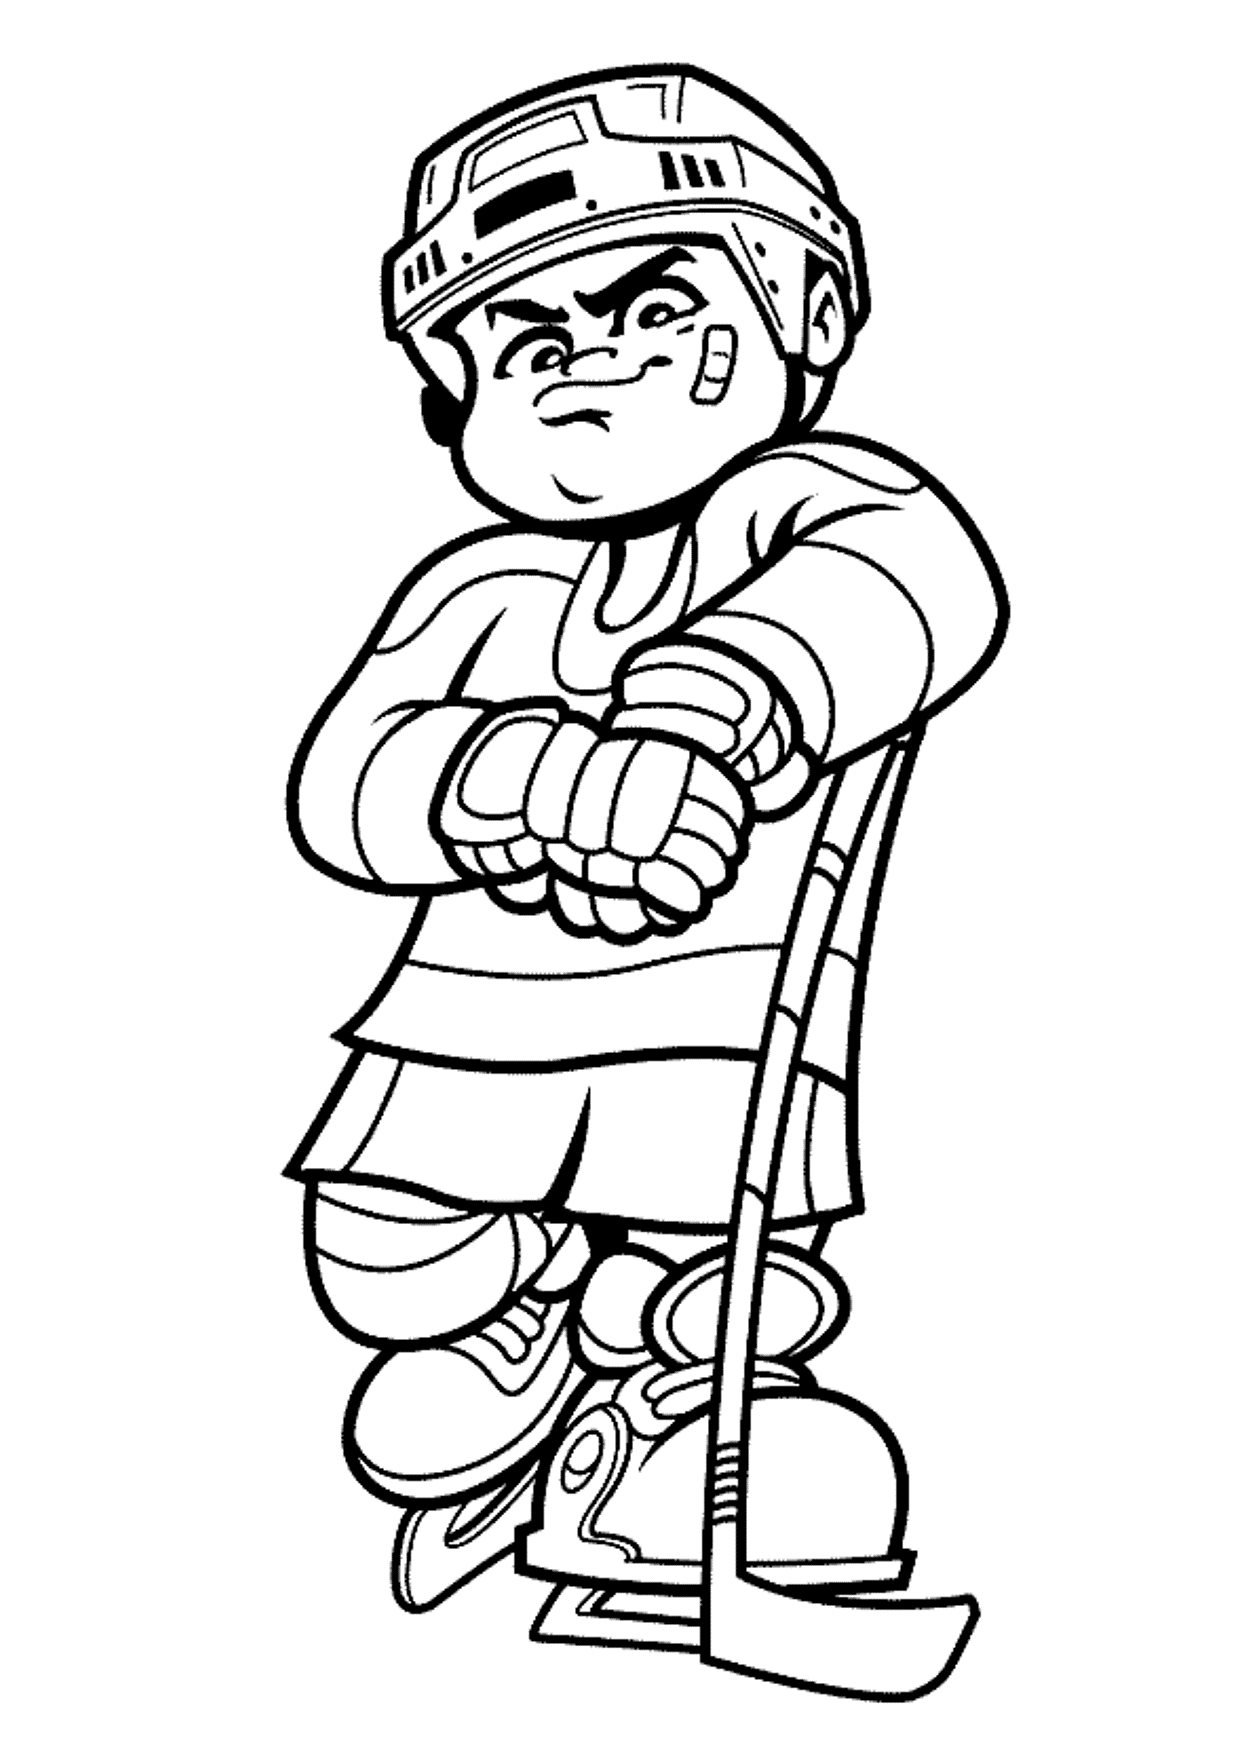 Hockey Boy Player Coloring Page